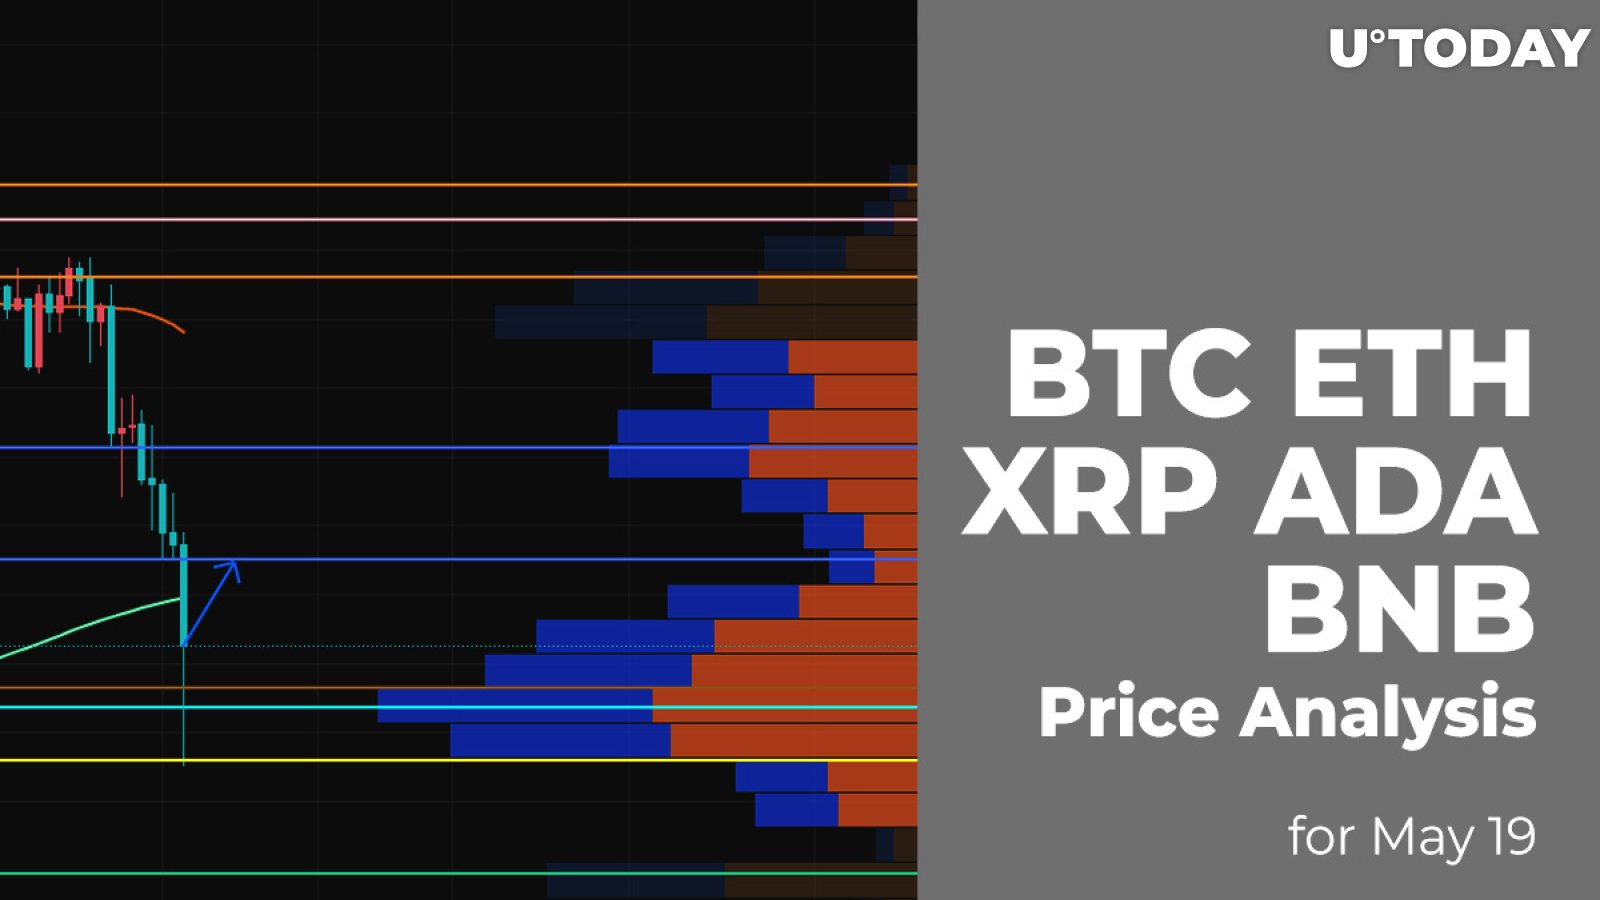 BTC, ETH, XRP, ADA and BNB Price Analysis for May 19